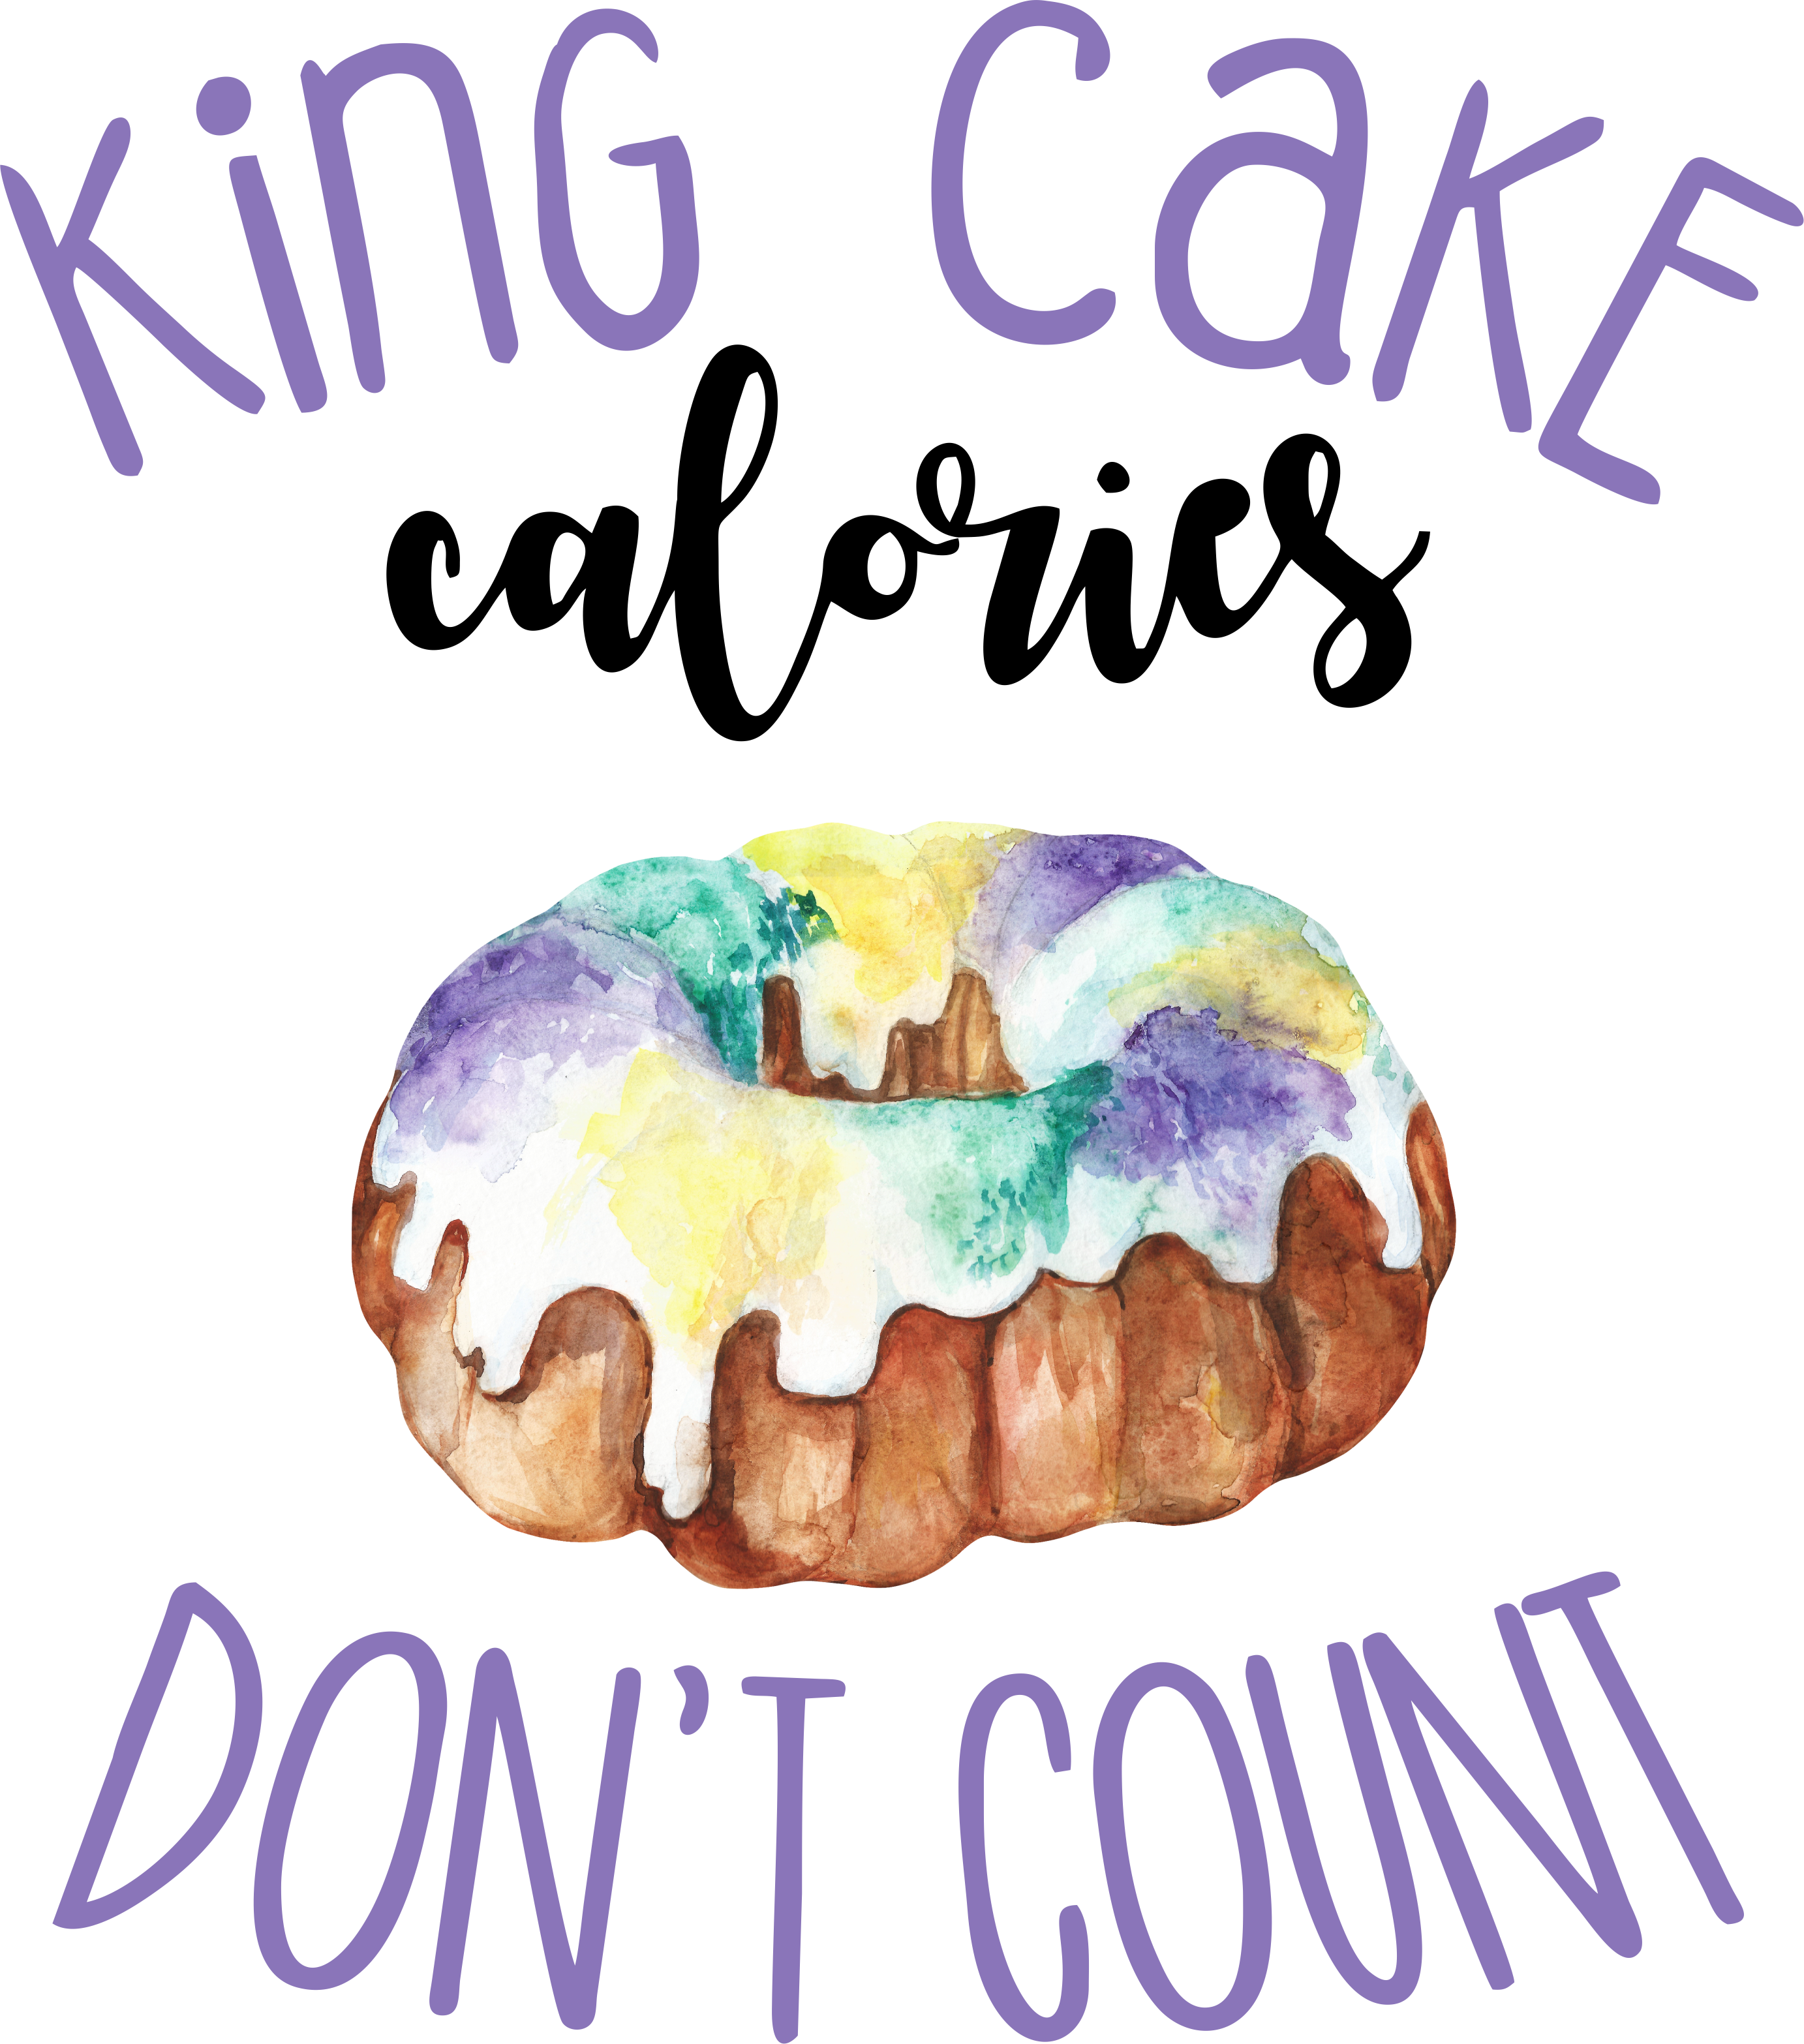 King Cake Calories don't count - Mardi Gras Graphic Tee